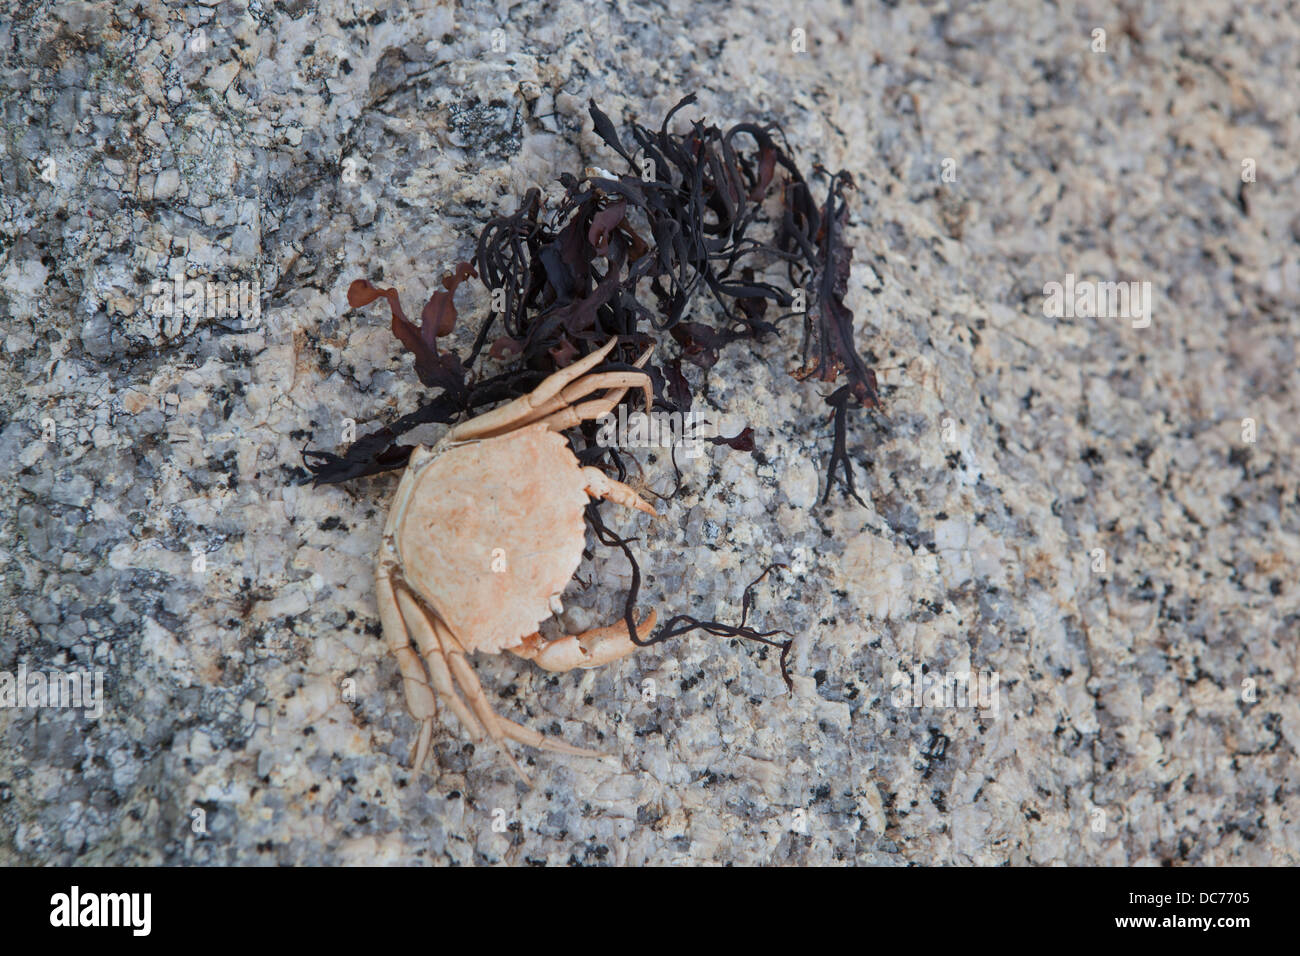 crab and seaweed on granite rock at beach in Maine Stock Photo